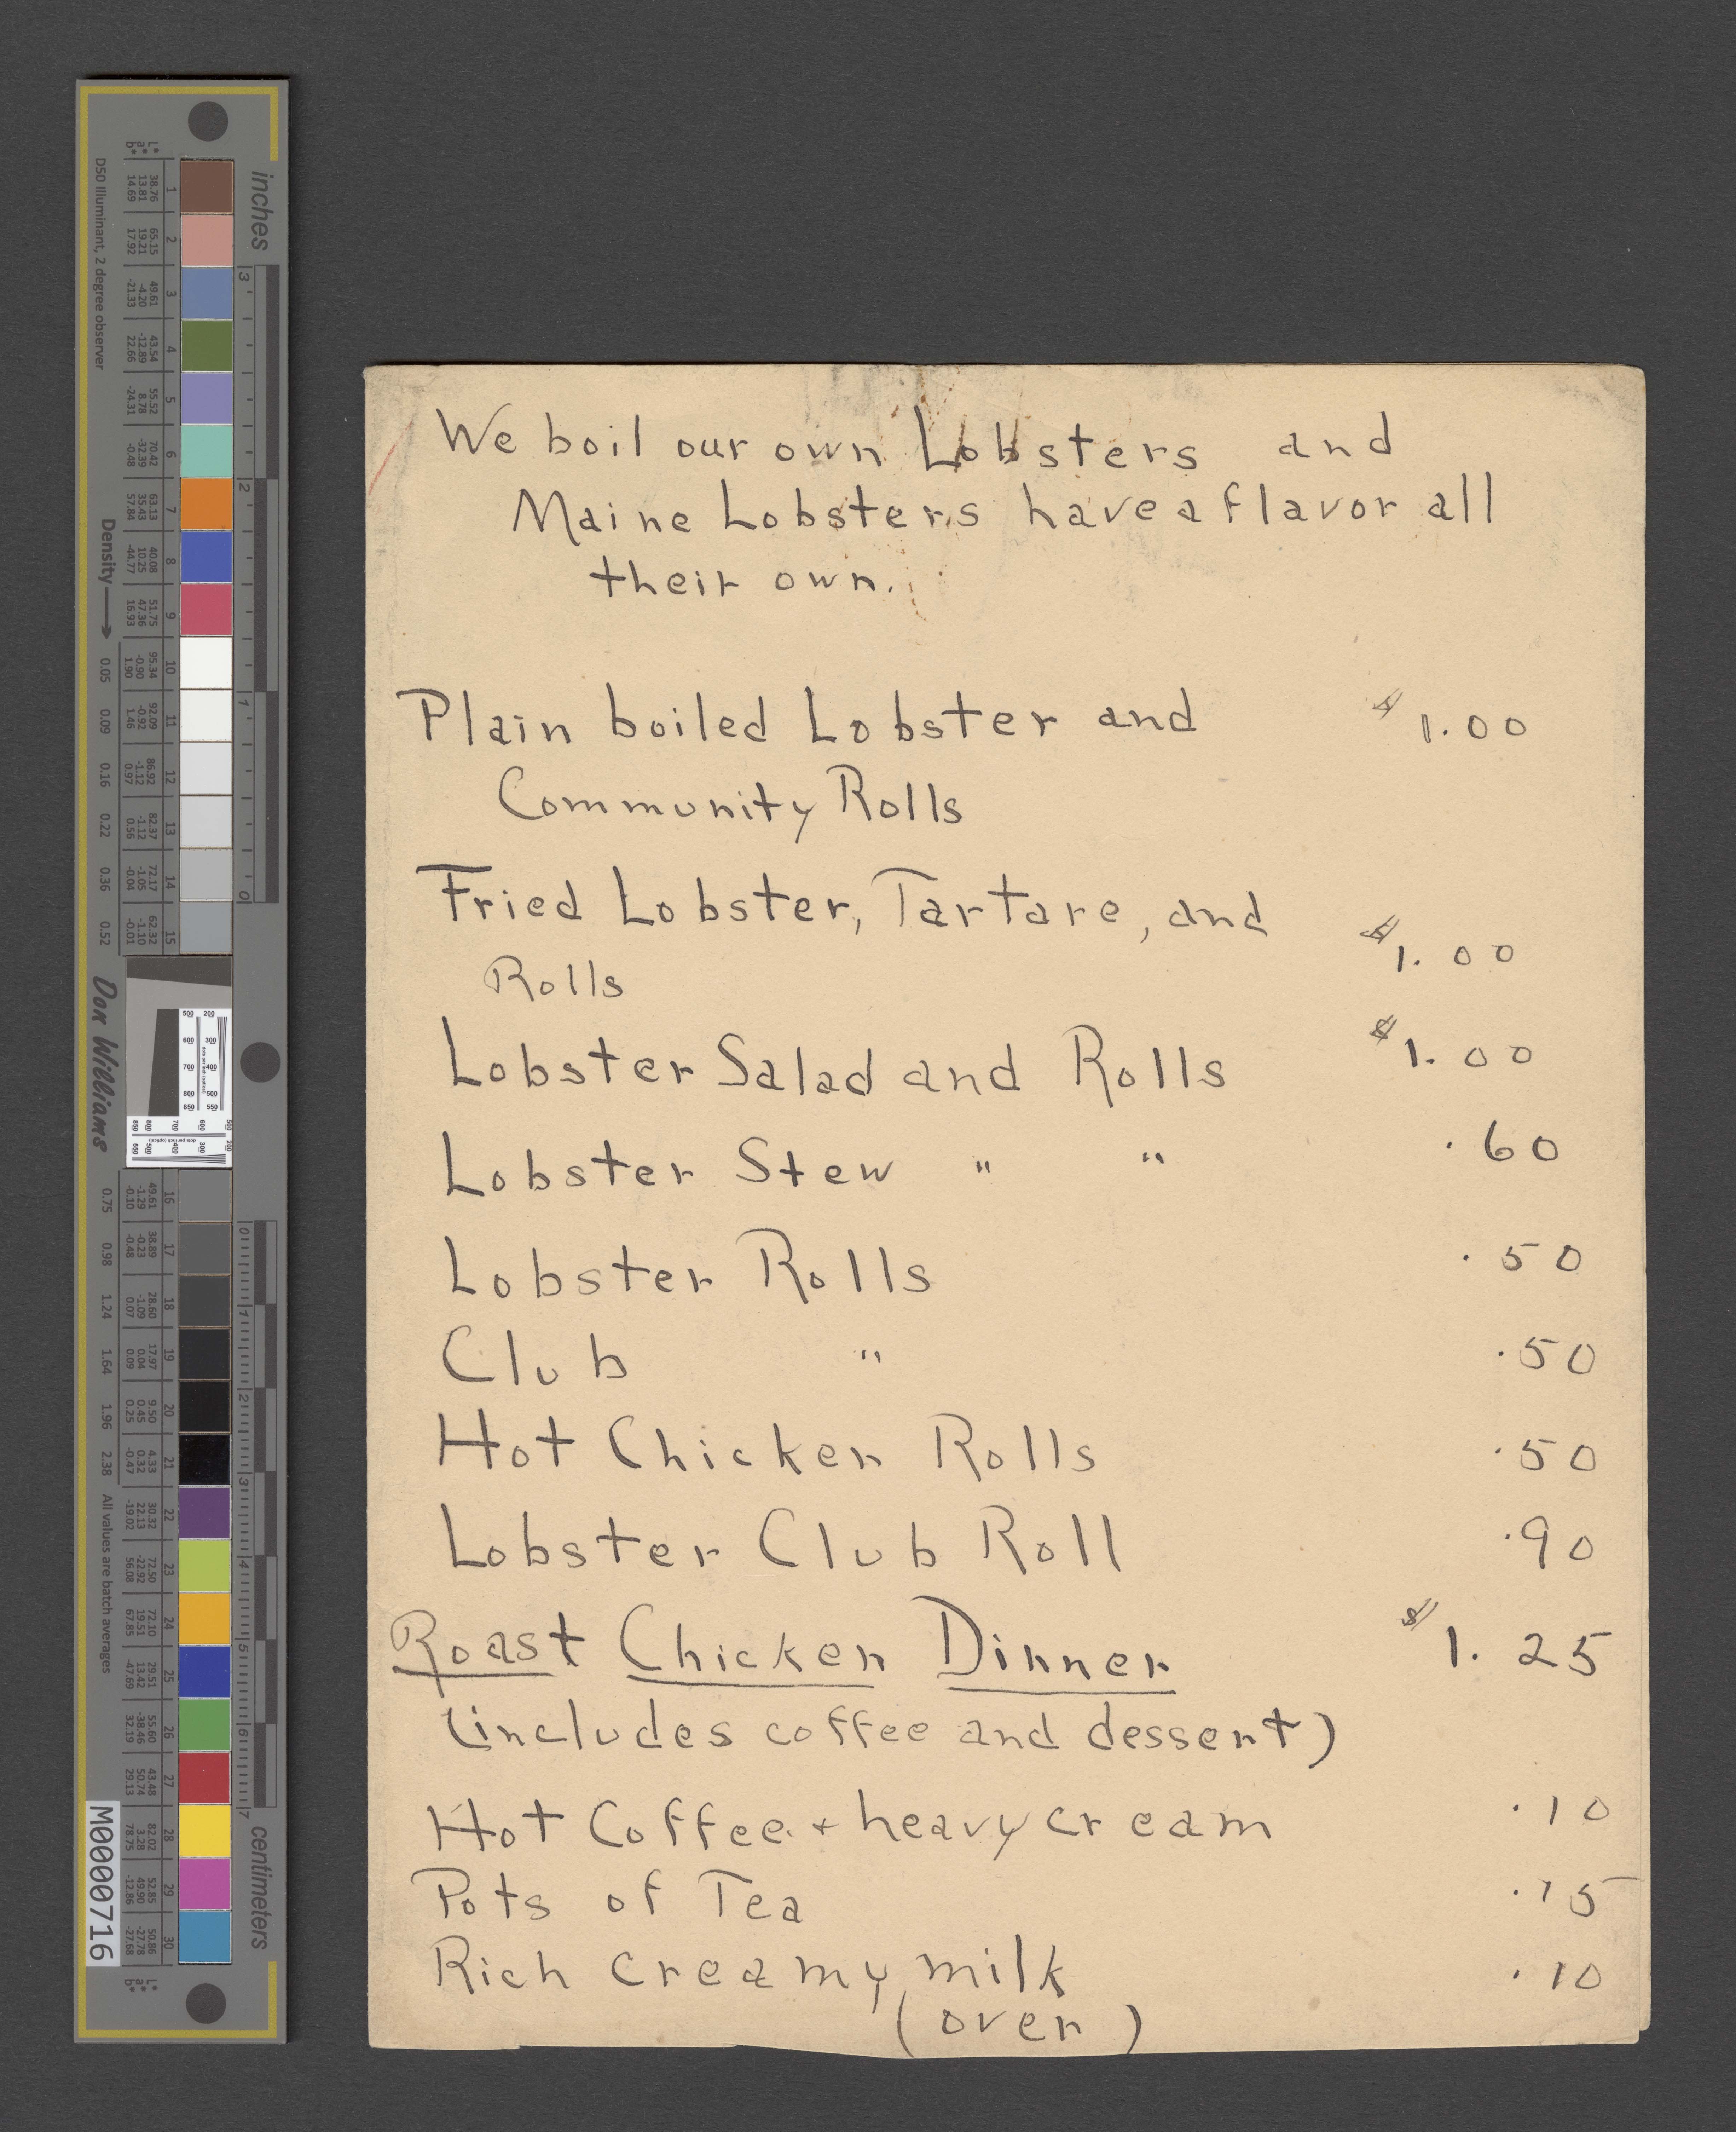 Handwritten menu for boiled lobster, fried lobster, lobster salad, lobster stew, lobster rolls, as well as a chicken dinner option, coffee, and tea